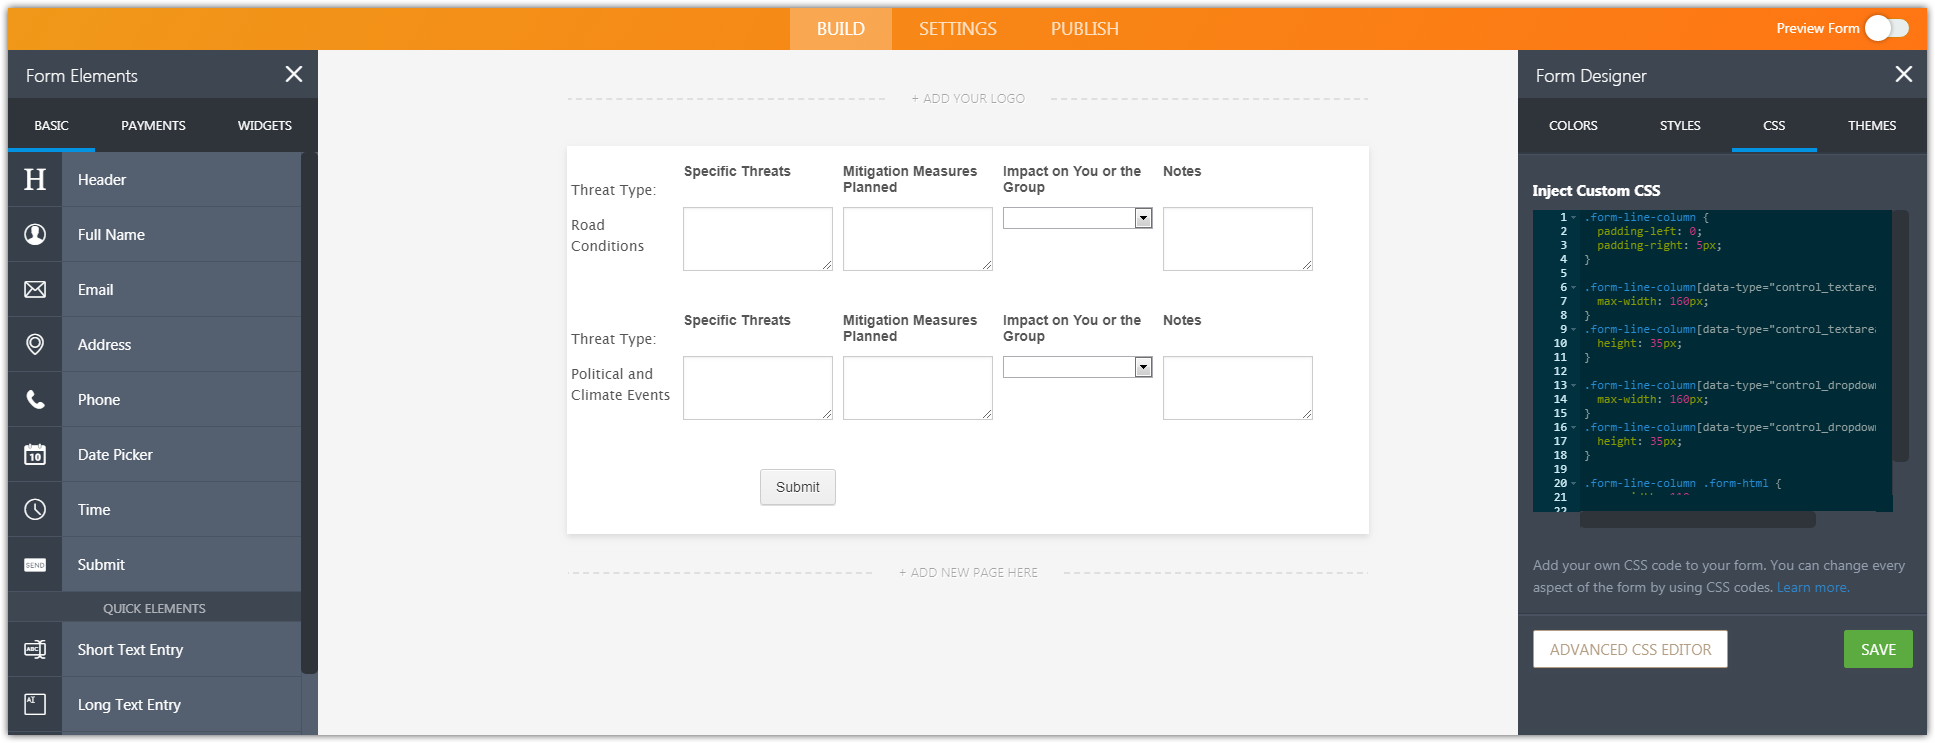 Configurable List Widget: Request to be able to set row names Image 1 Screenshot 20